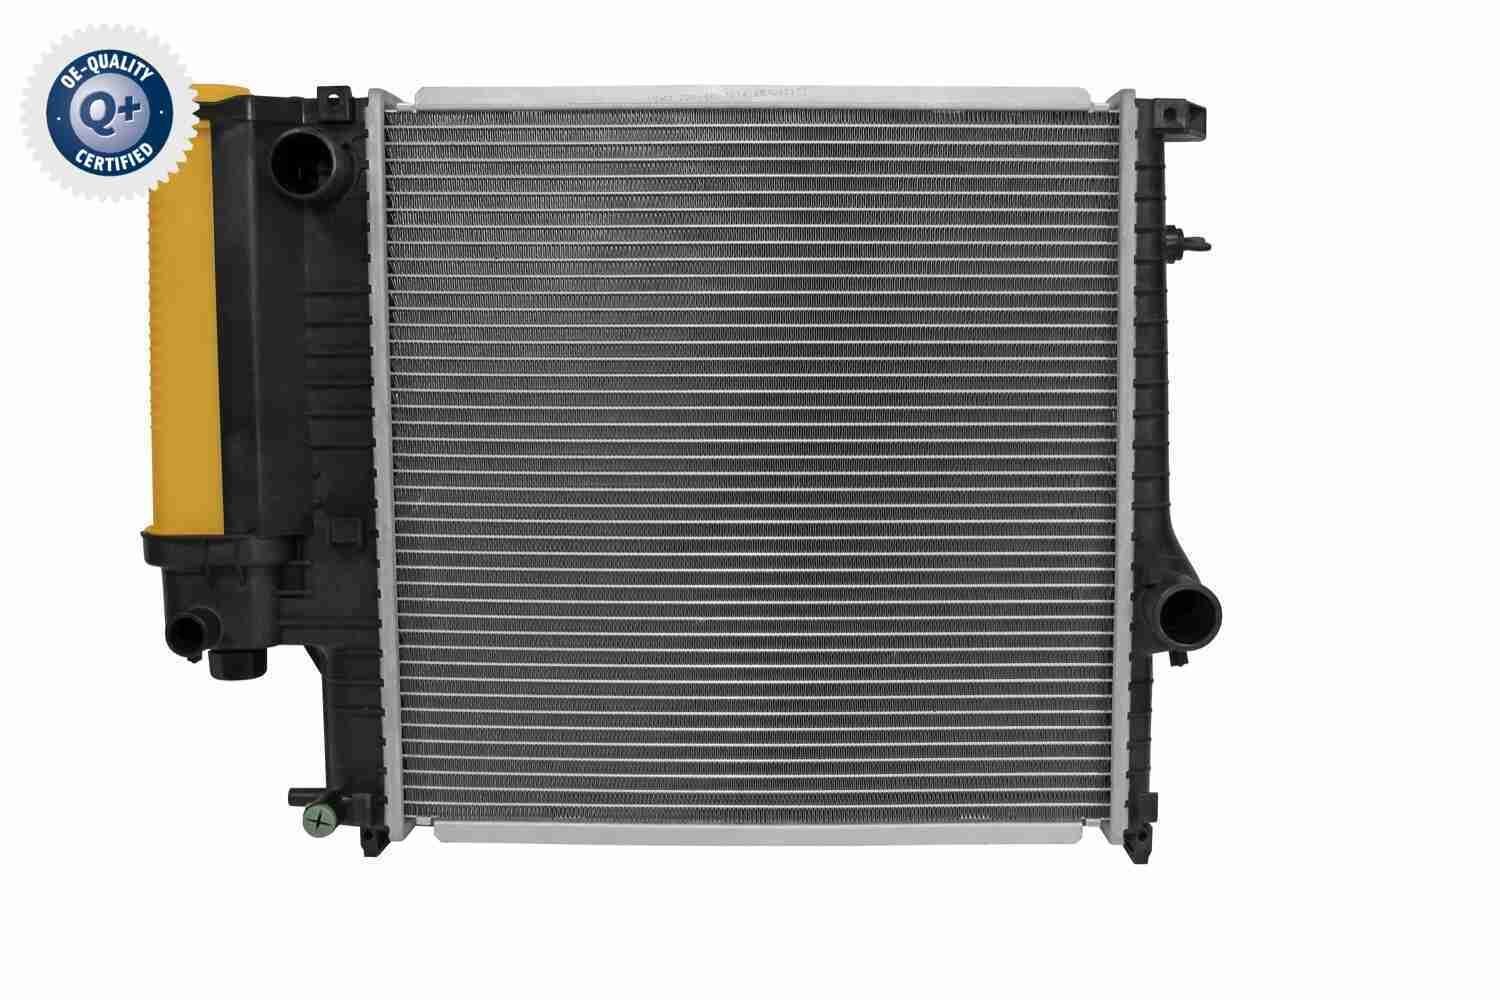 VEMO V20-60-1514 Engine radiator for vehicles without air conditioning, 438 x 438 x 34 mm, Q+, original equipment manufacturer quality, Manual Transmission